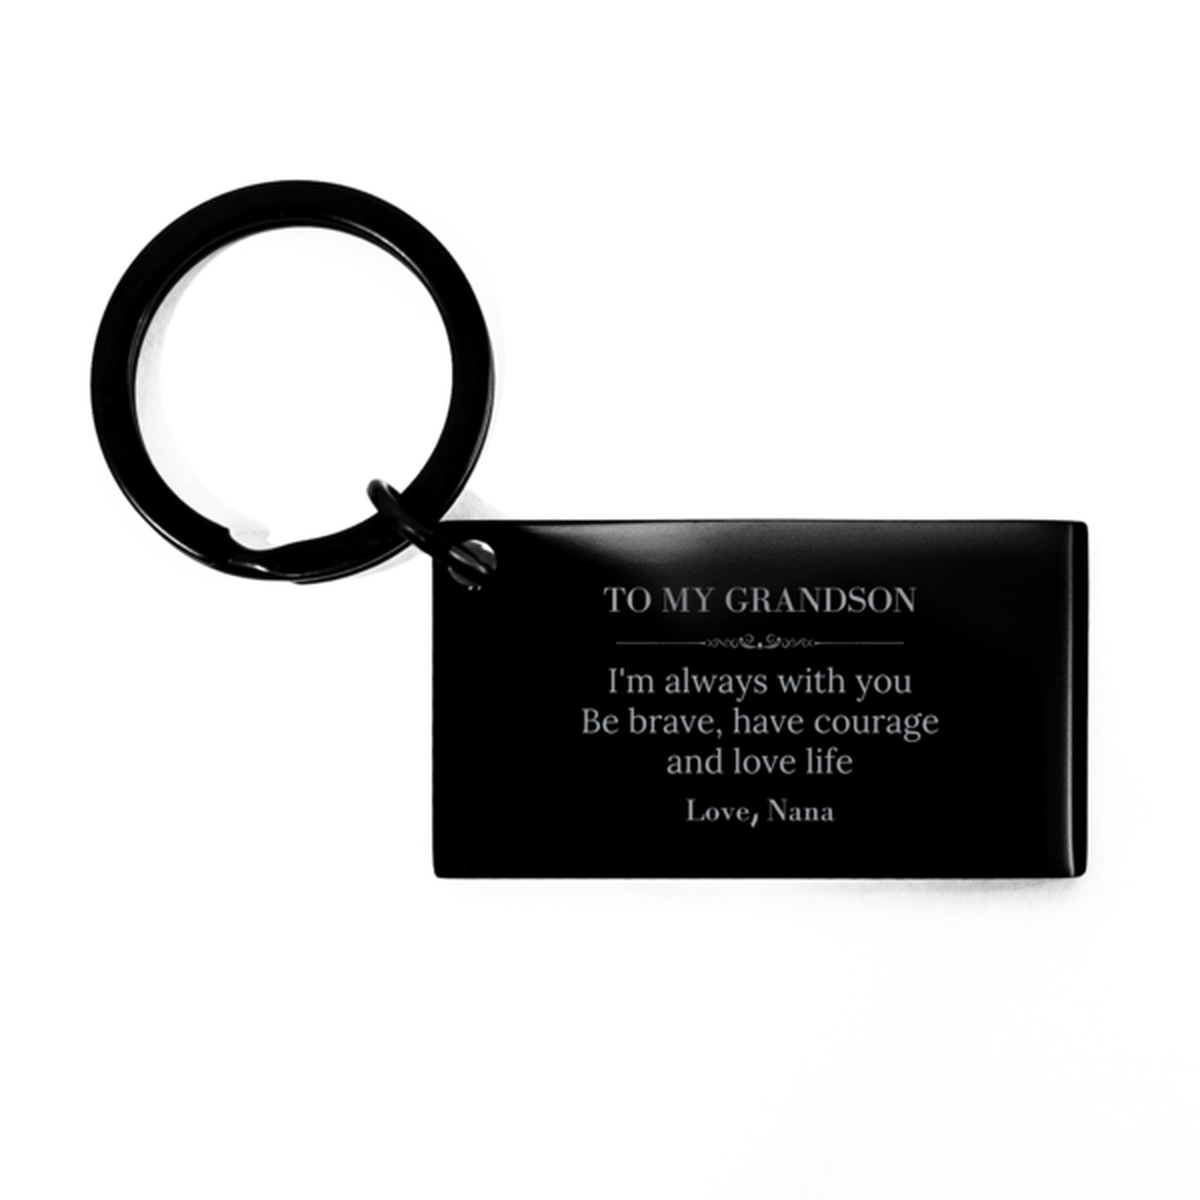 To My Grandson Gifts from Nana, Unique Keychain Inspirational Christmas Birthday Graduation Gifts for Grandson I'm always with you. Be brave, have courage and love life. Love, Nana